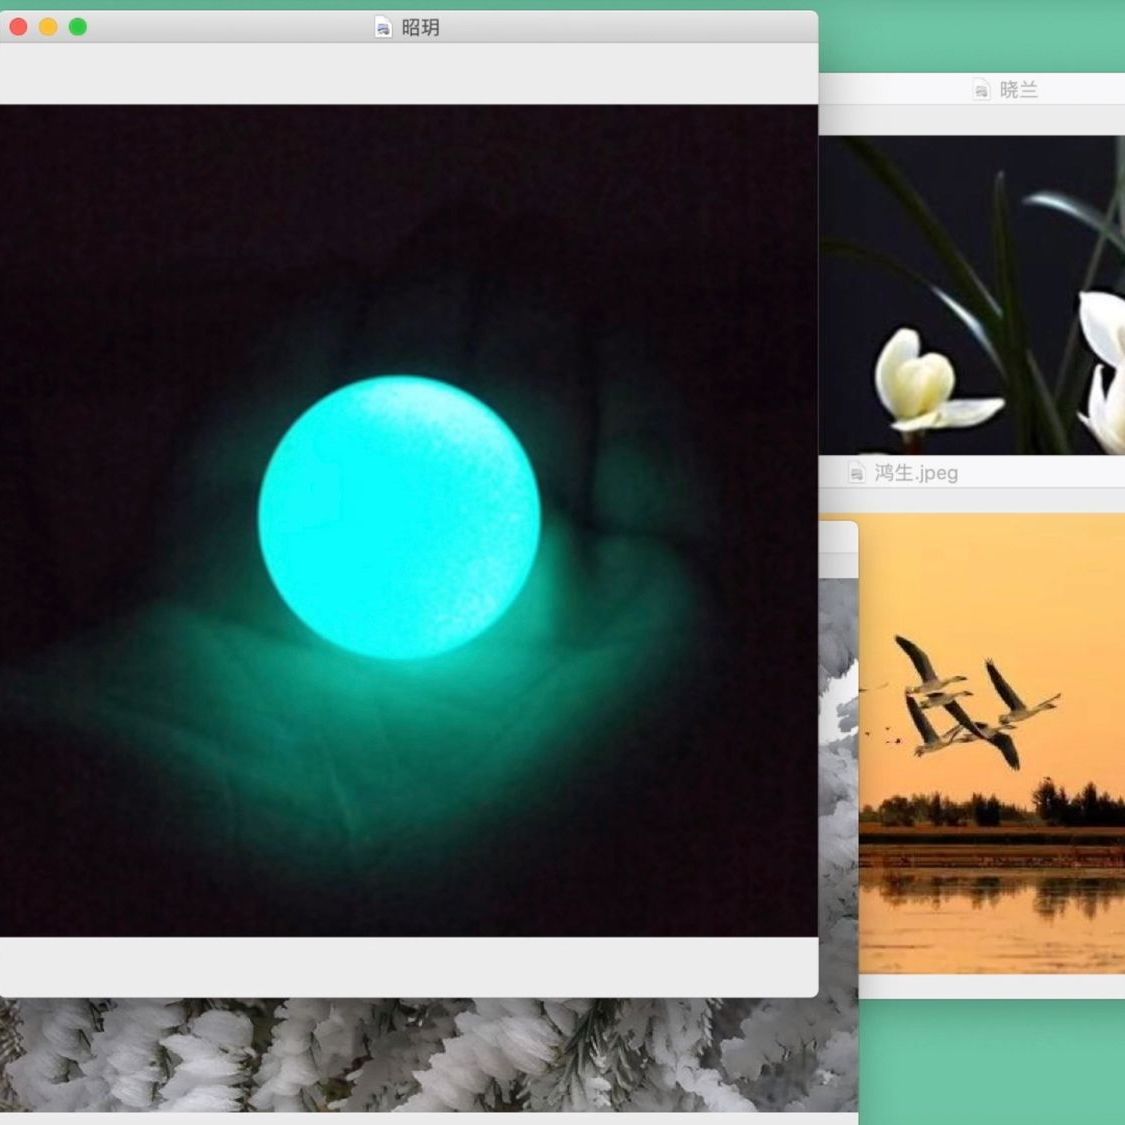 Multiple windows on a computer screen against a green background. Images: a knife and sheath, a green glowing orb, birds, flowers